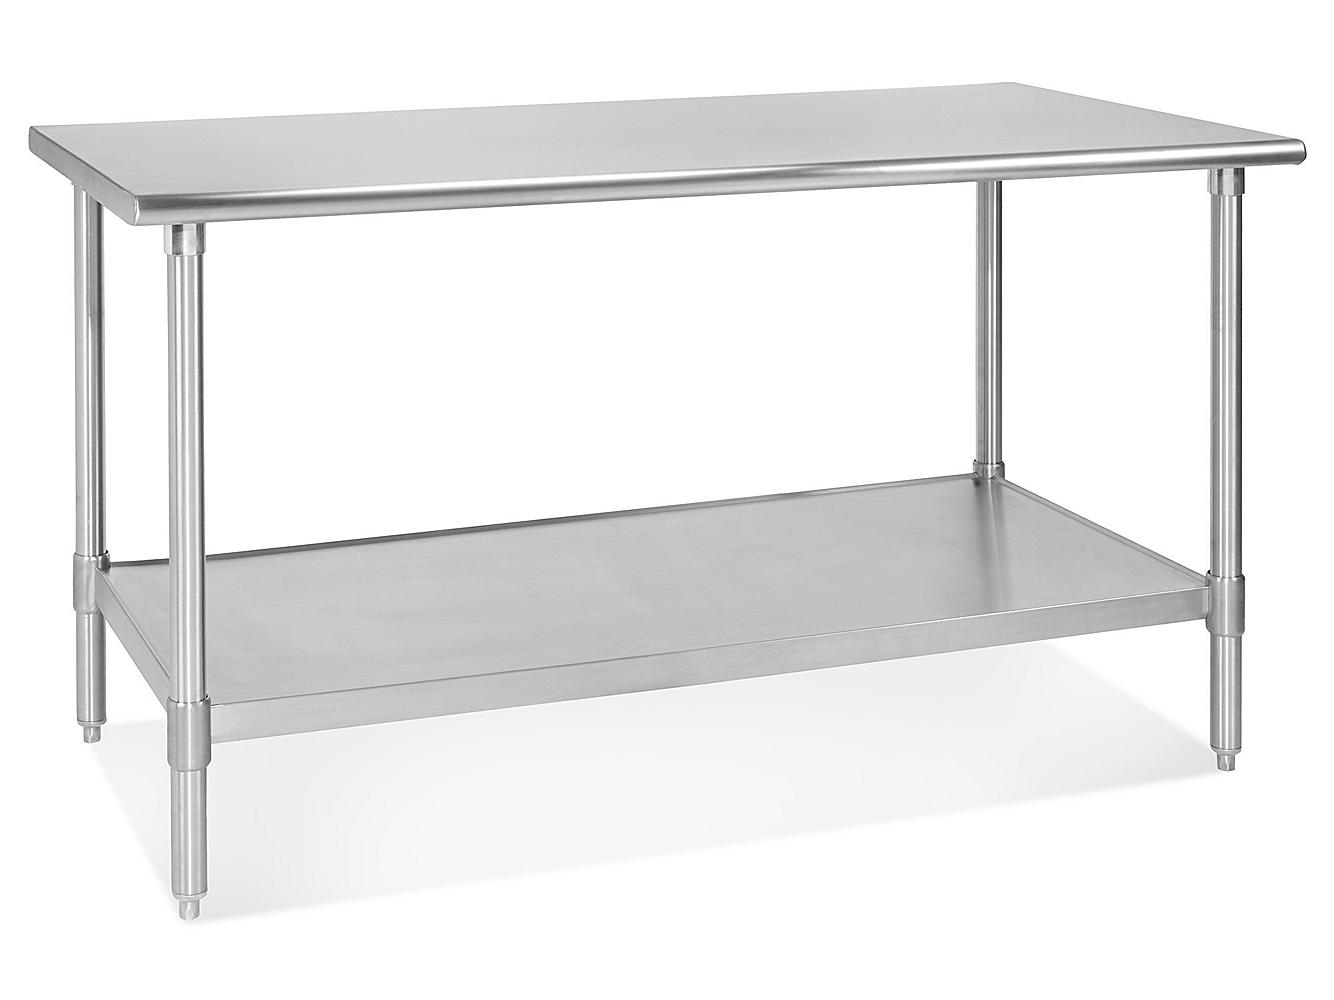 Deluxe Stainless Steel Worktable with Bottom Shelf - 60 x 30